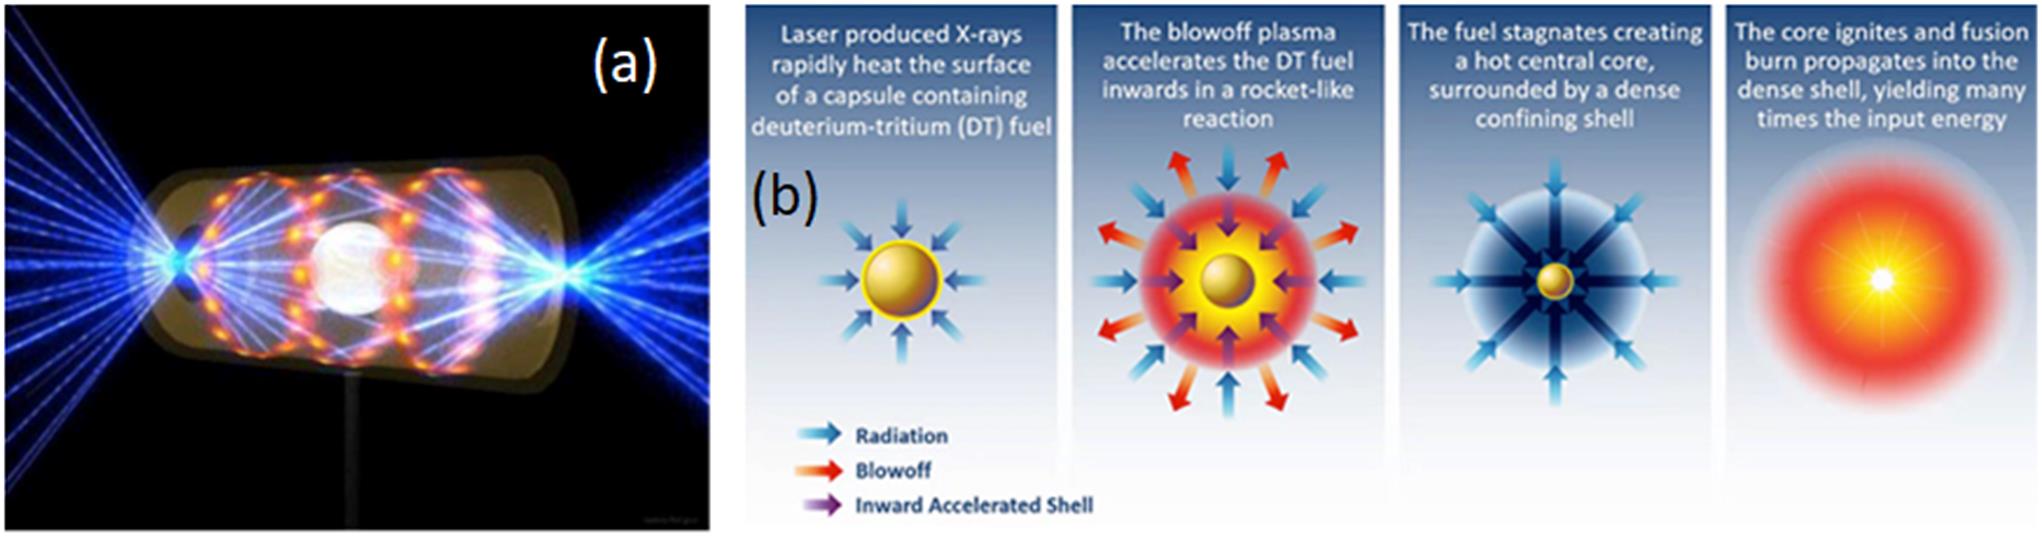 (a) Laser beams irradiating the hohlraum enclosing and the DT-filled capsule at the NIF (image courtesy of the LLNL). (b) Sequence of four stages of the ICF process in the indirect-drive scheme: (i) irradiation of the spherical capsule by X-rays; (ii) ablation of the outer part of the capsule and implosion of the DT fuel; (iii) ignition of the fusion reactions in the central hot spot; (iv) combustion of the compressed fuel and energy release.